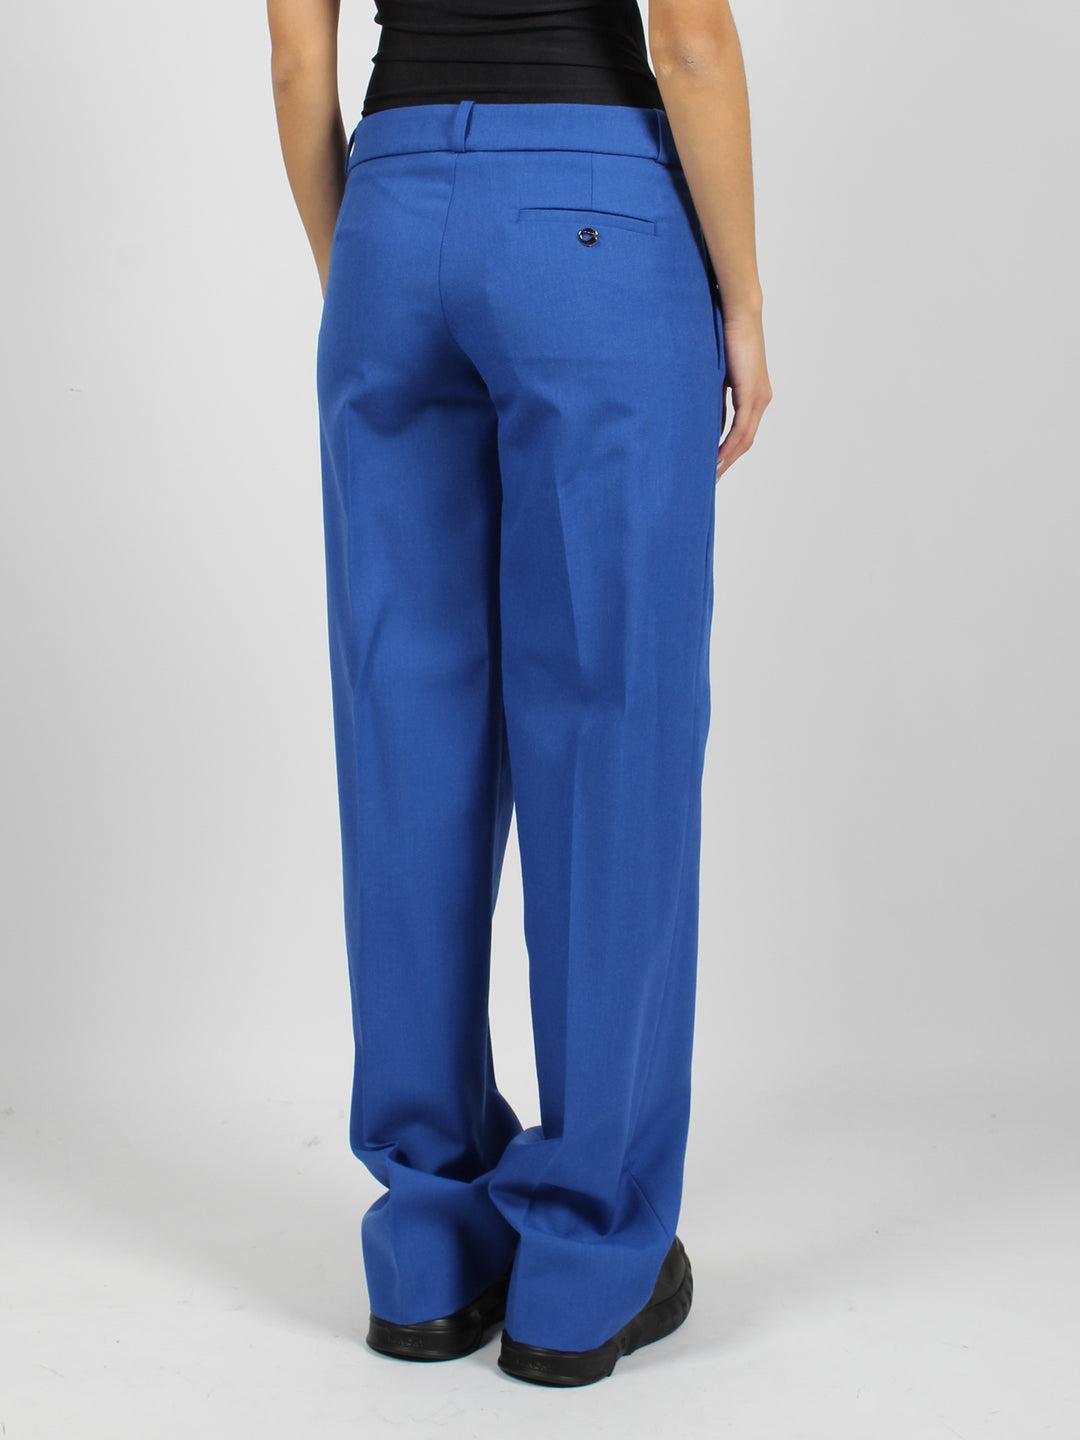 Low rise loose tailored trousers